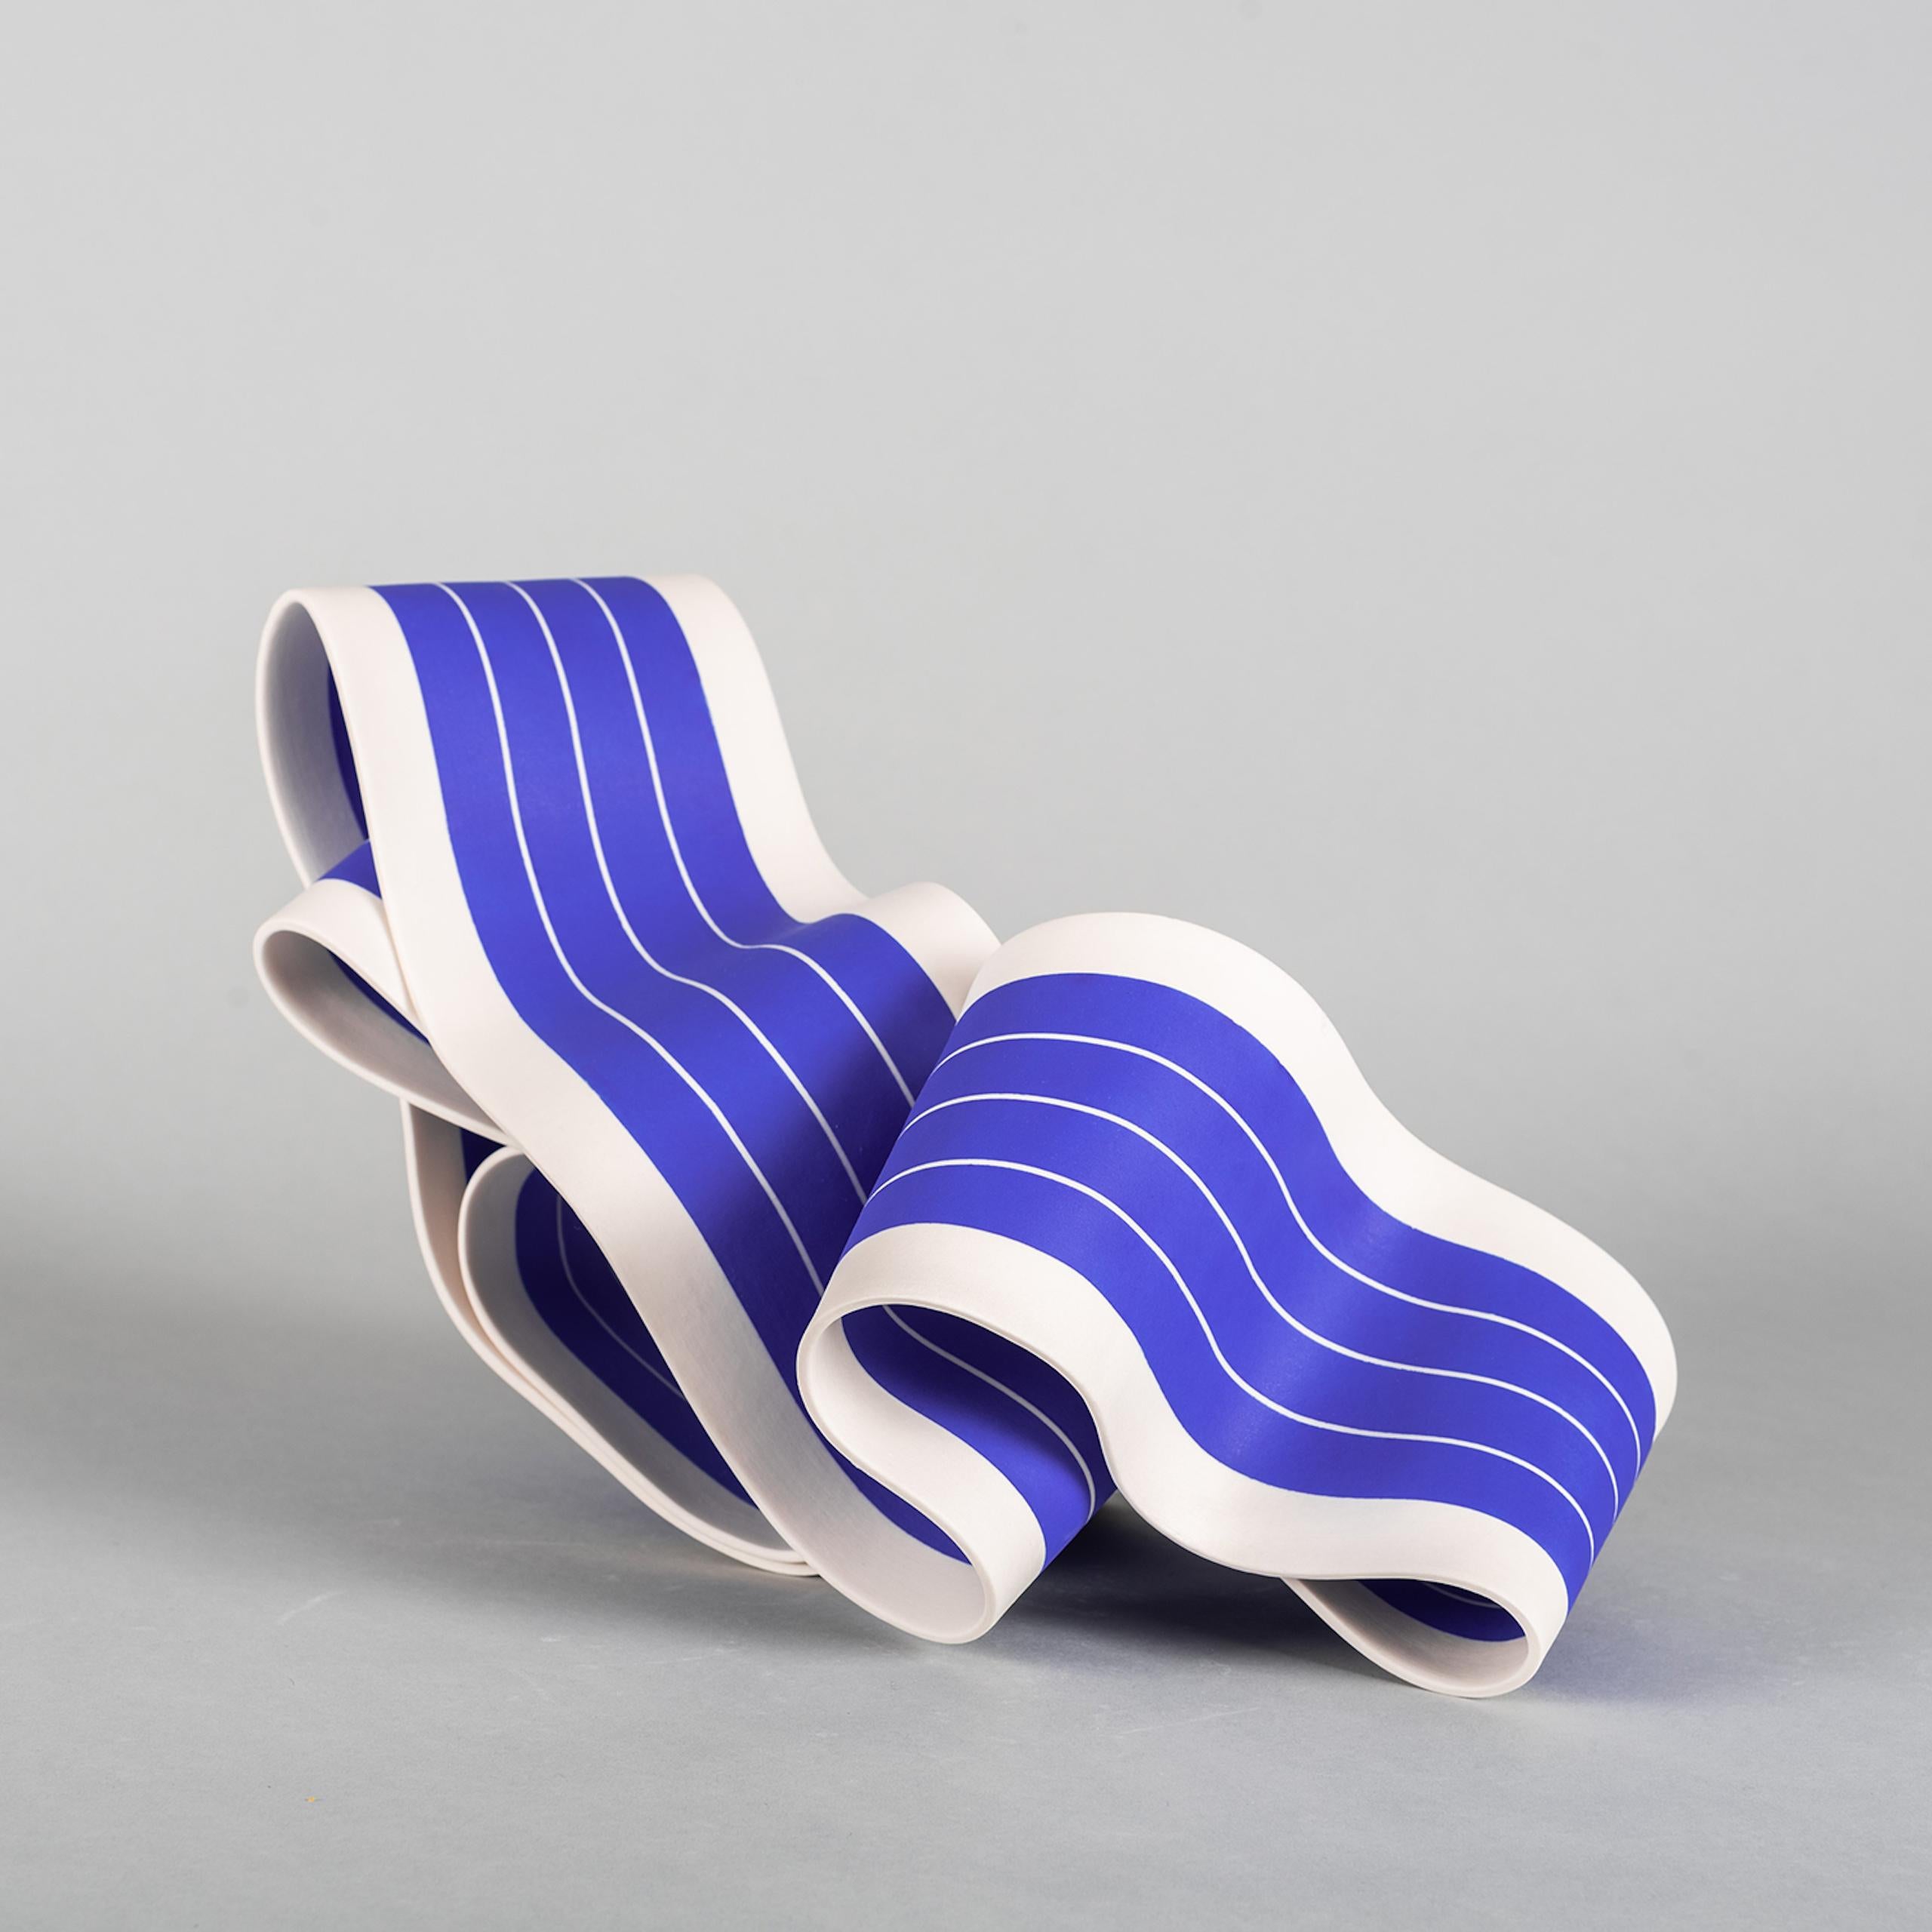 Folding in Motion 2 by Simcha Even-Chen - Porcelain sculpture, blue, white, line For Sale 1